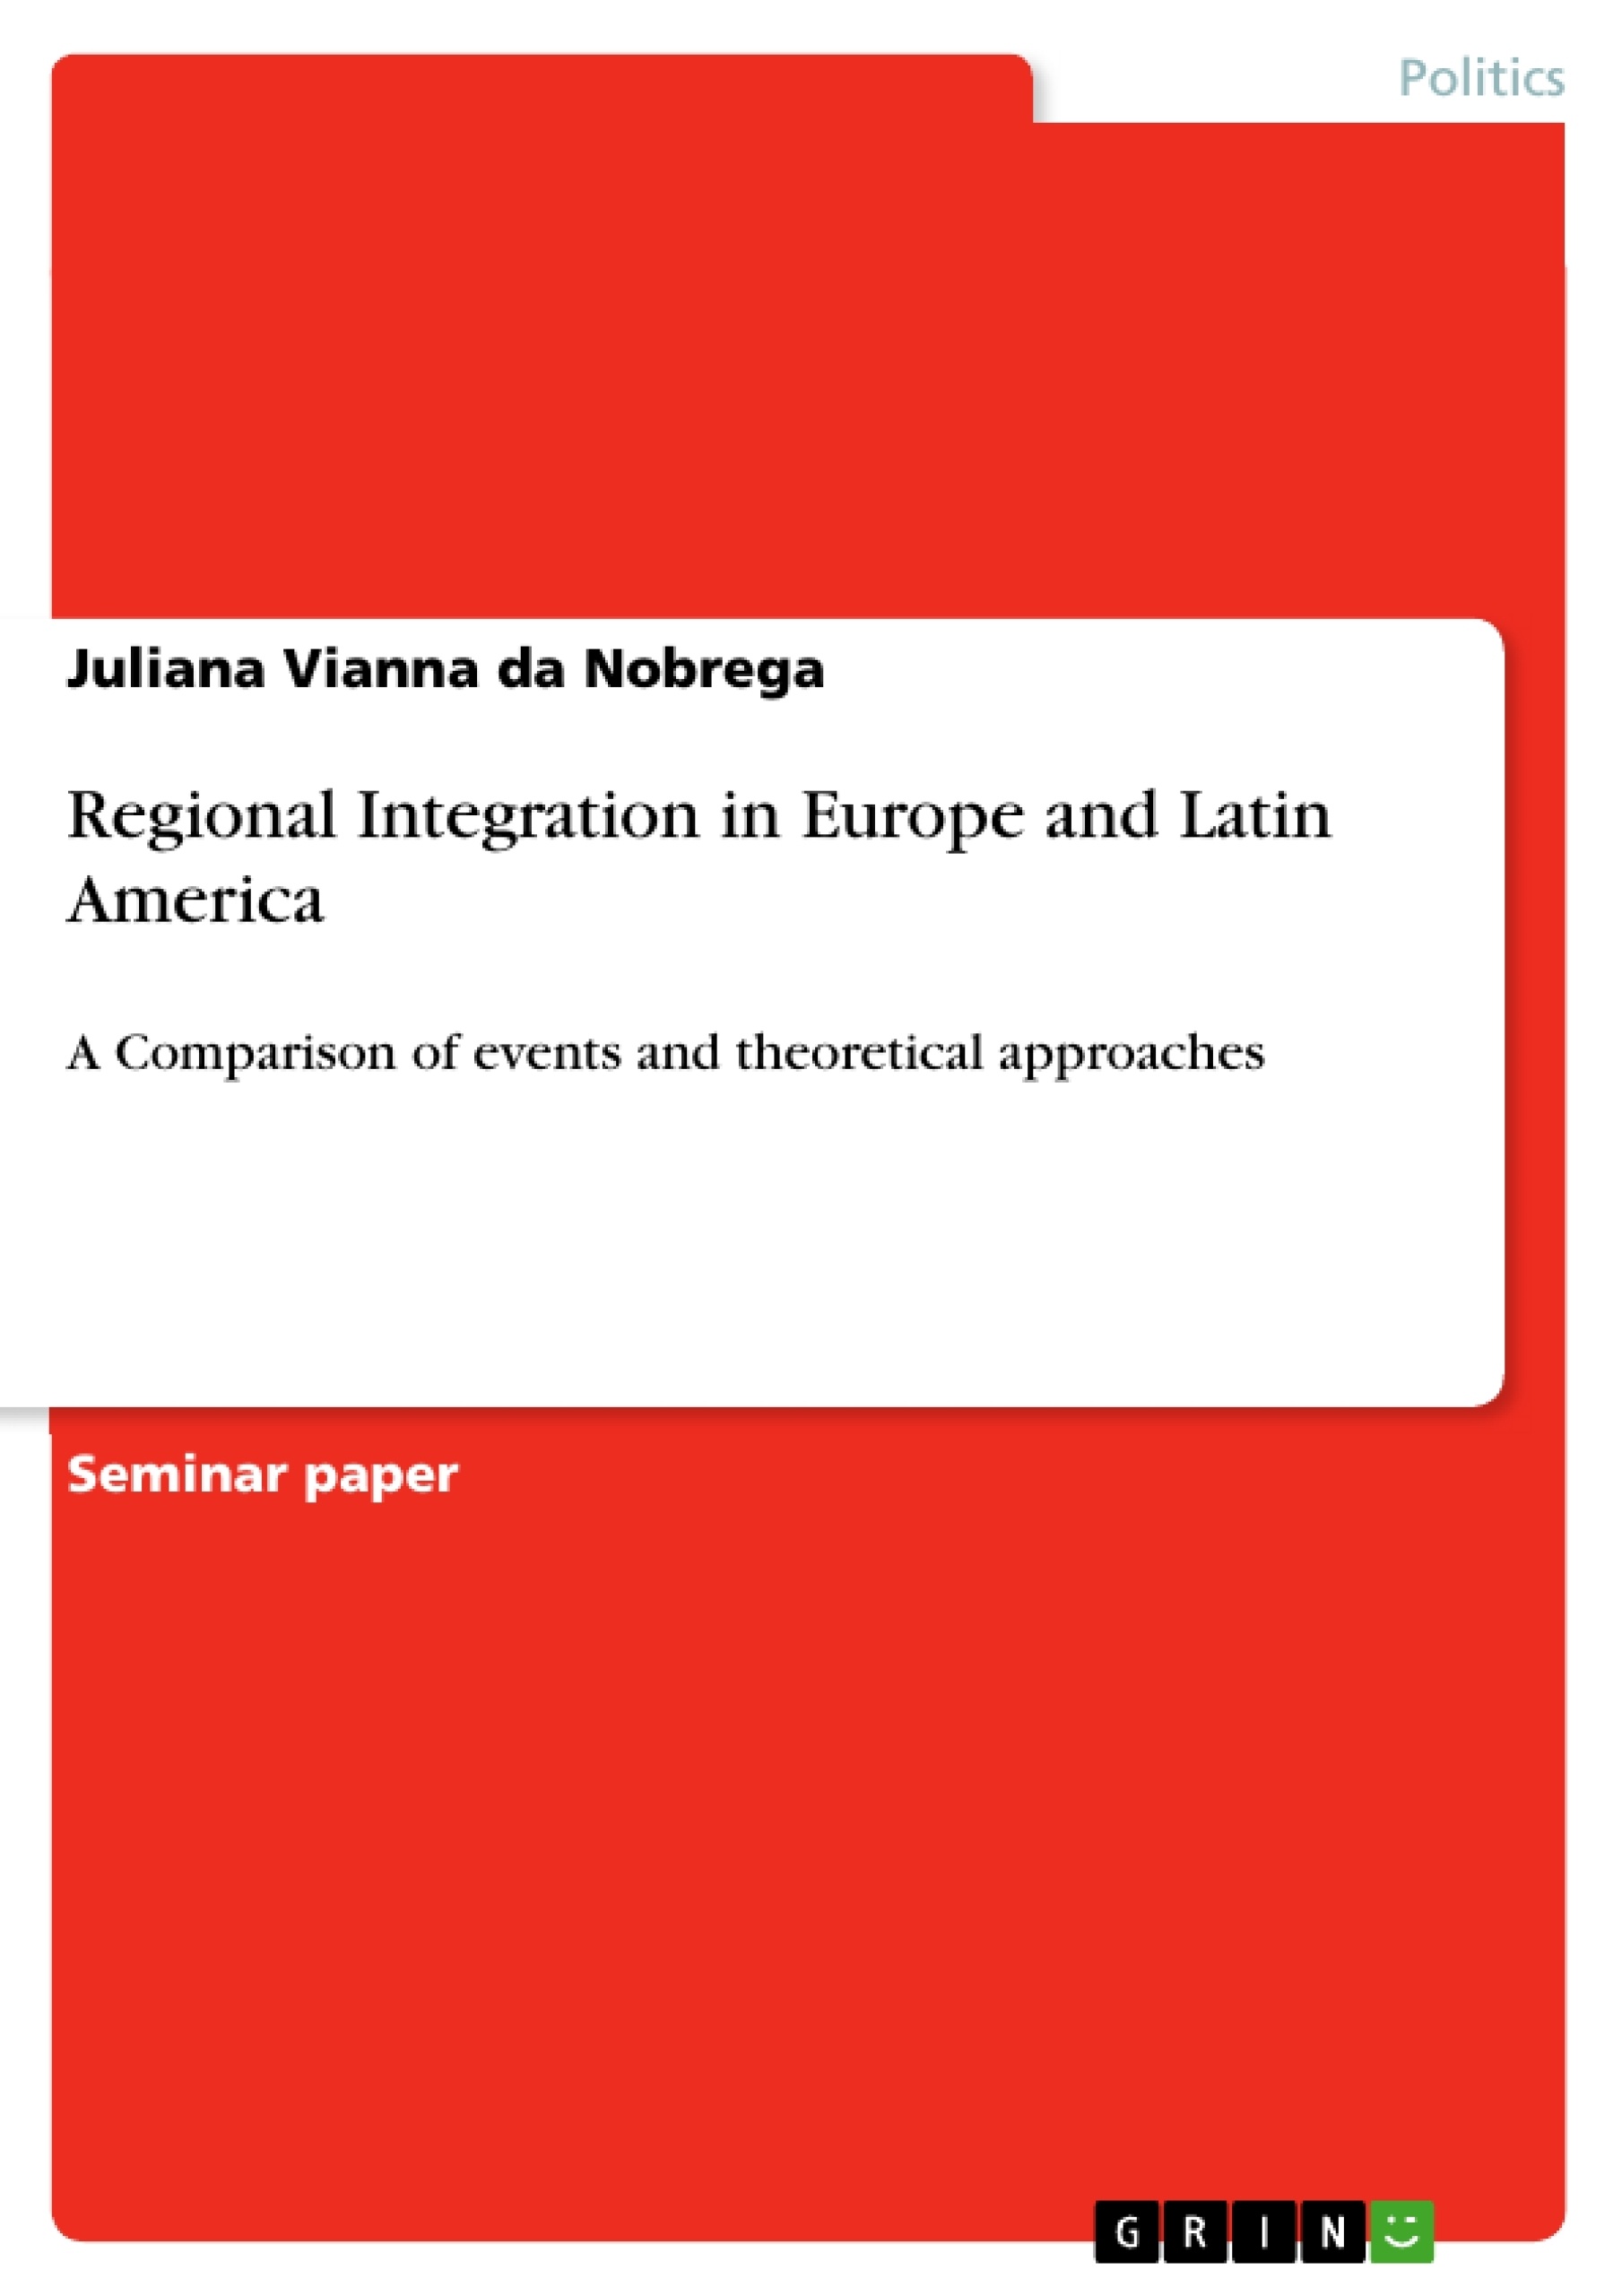 Title: Regional Integration in Europe and Latin America